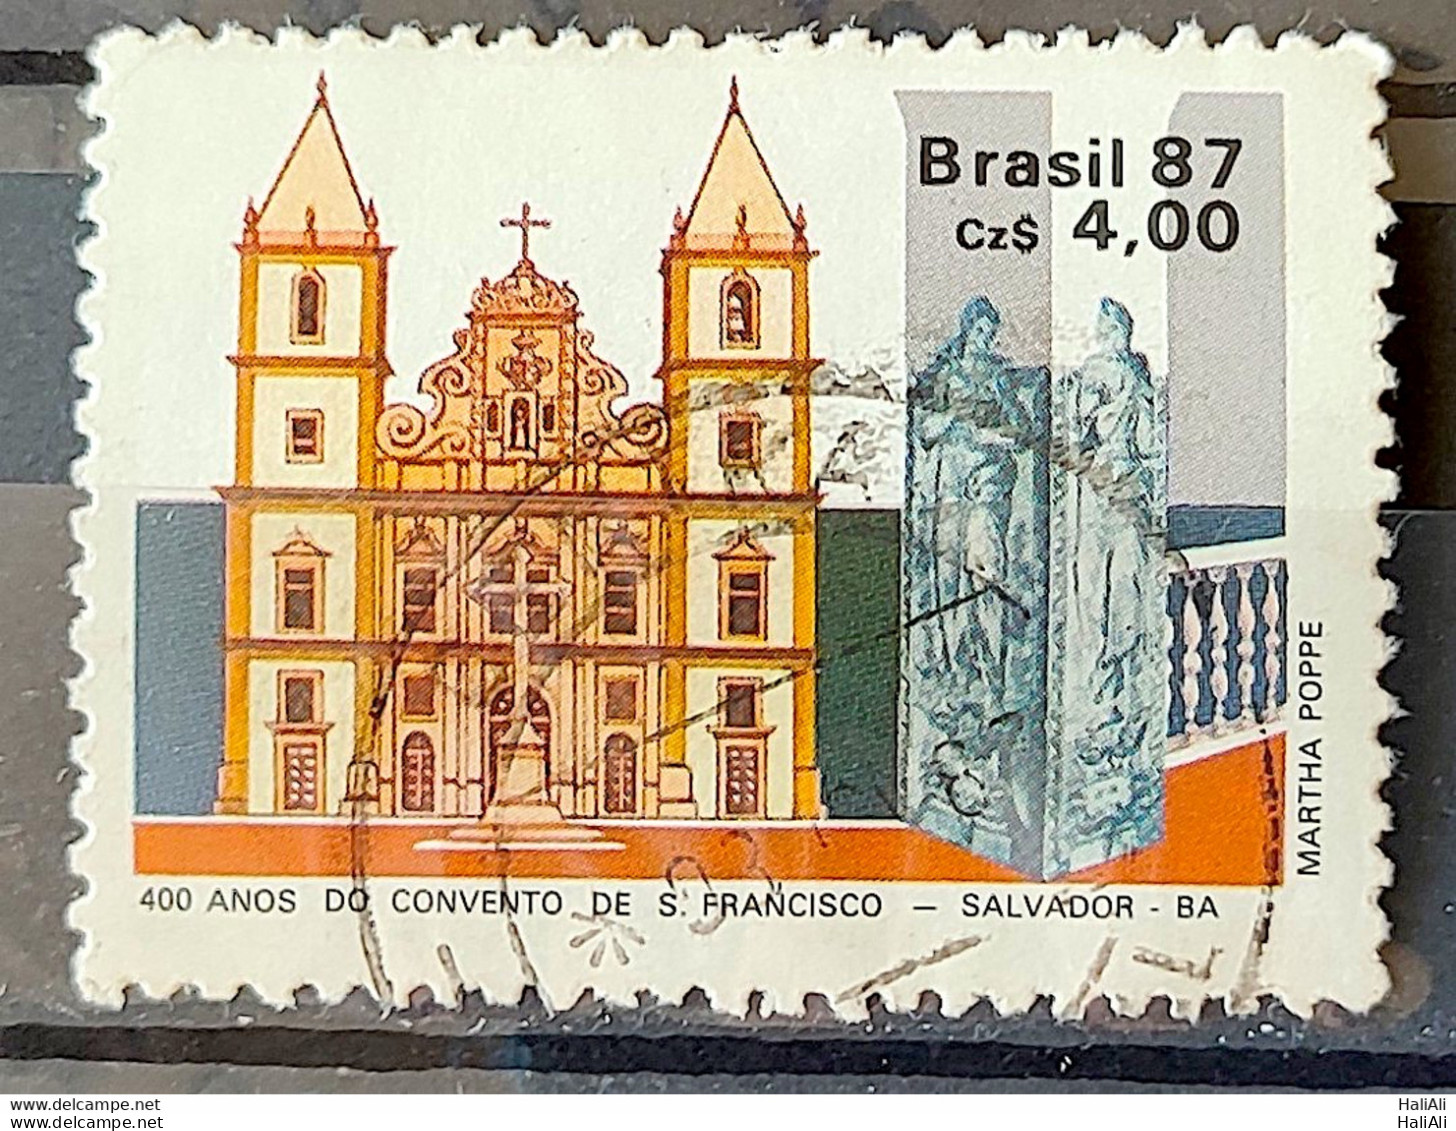 C 1563 Brazil Stamp 400 Years Convent Of Sao Francisco Salvador Bahia Religion Church 1987 Circulated 5 - Used Stamps